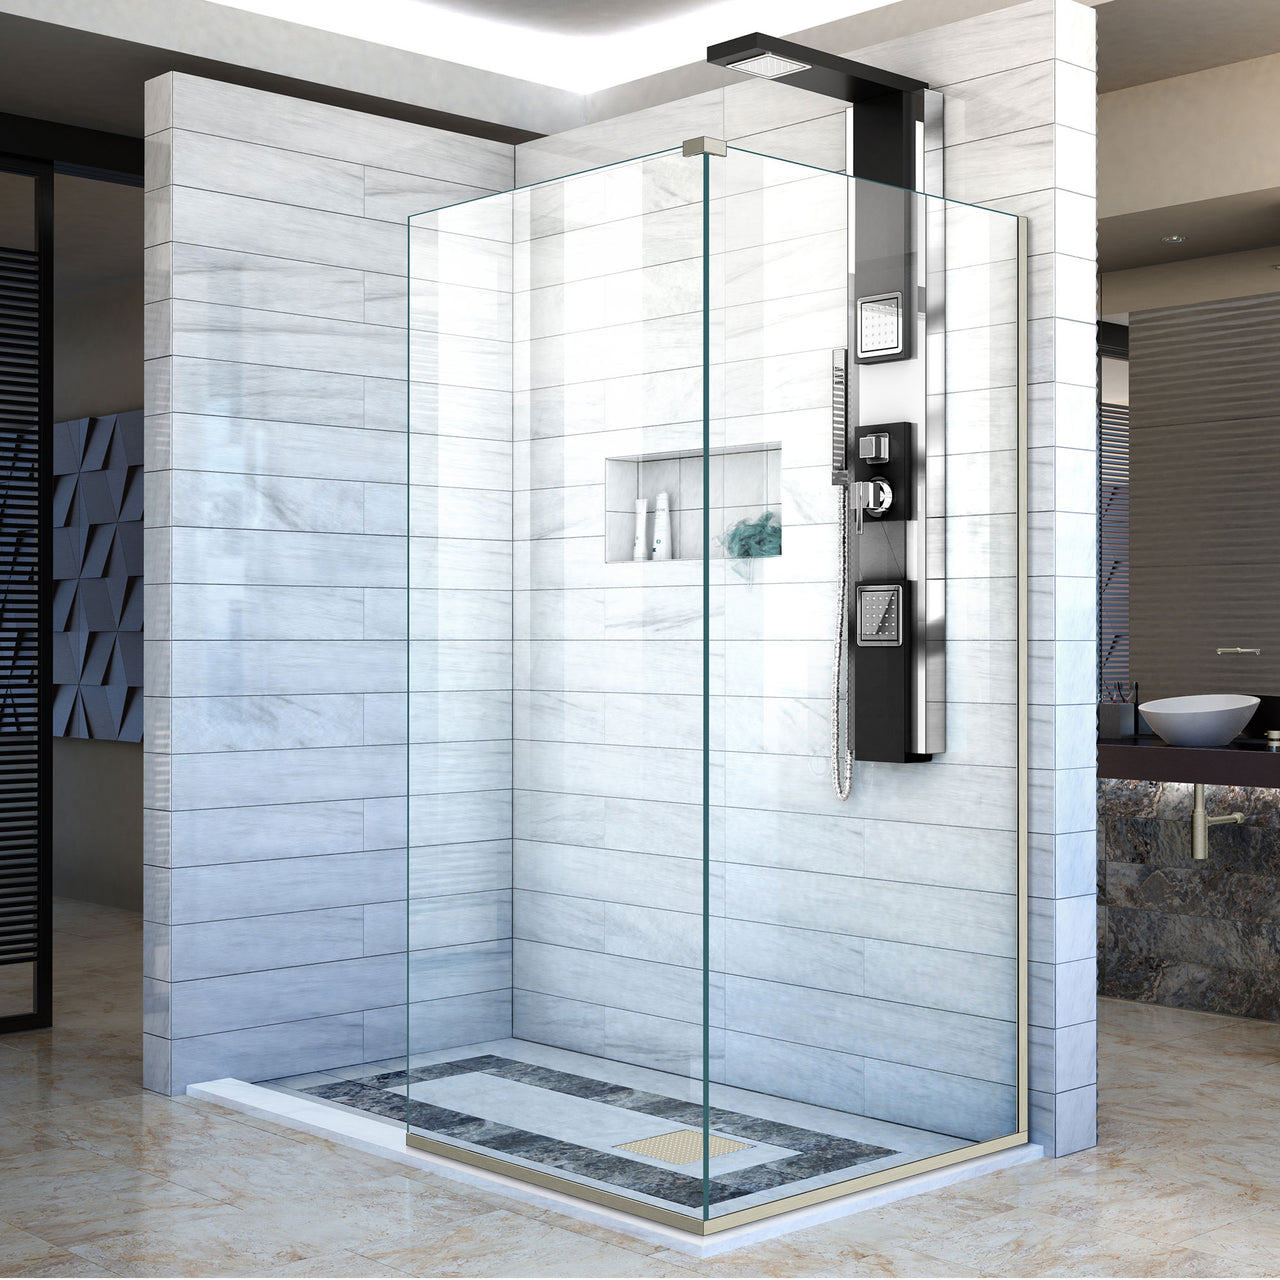 DreamLine Linea Two Adjacent Frameless Shower Screens 30 in. and 34 in. W x 72 in. H, Open Entry Design - BNGBath